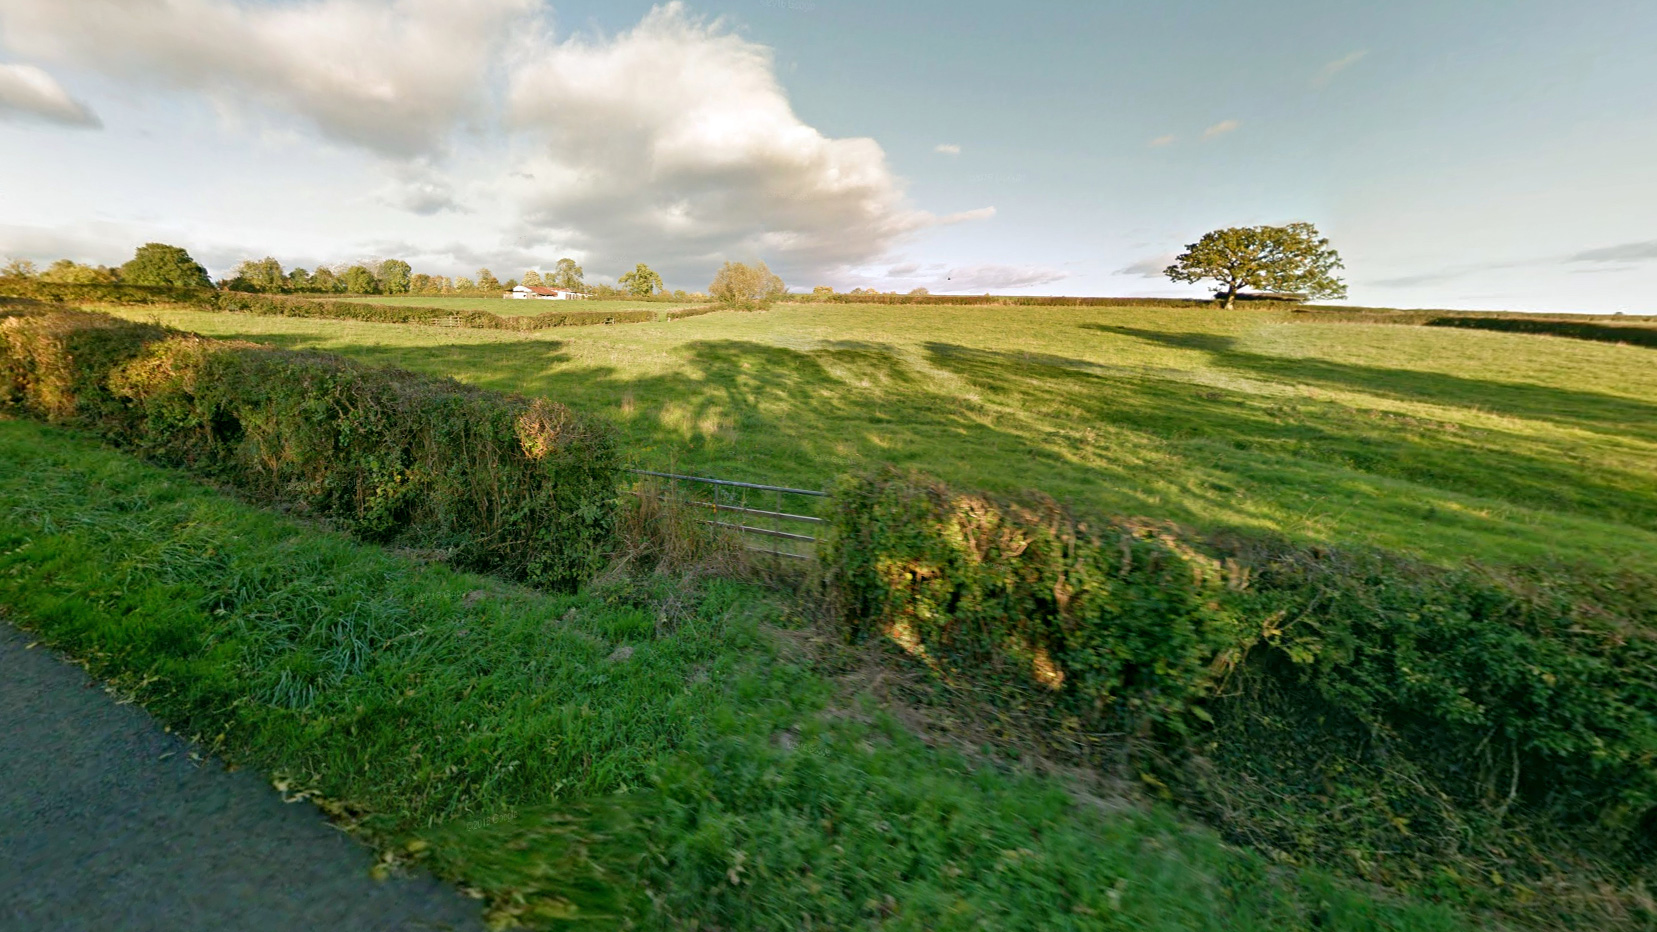 Land for sale at Berrowhill View in Feckenham, Redditch access